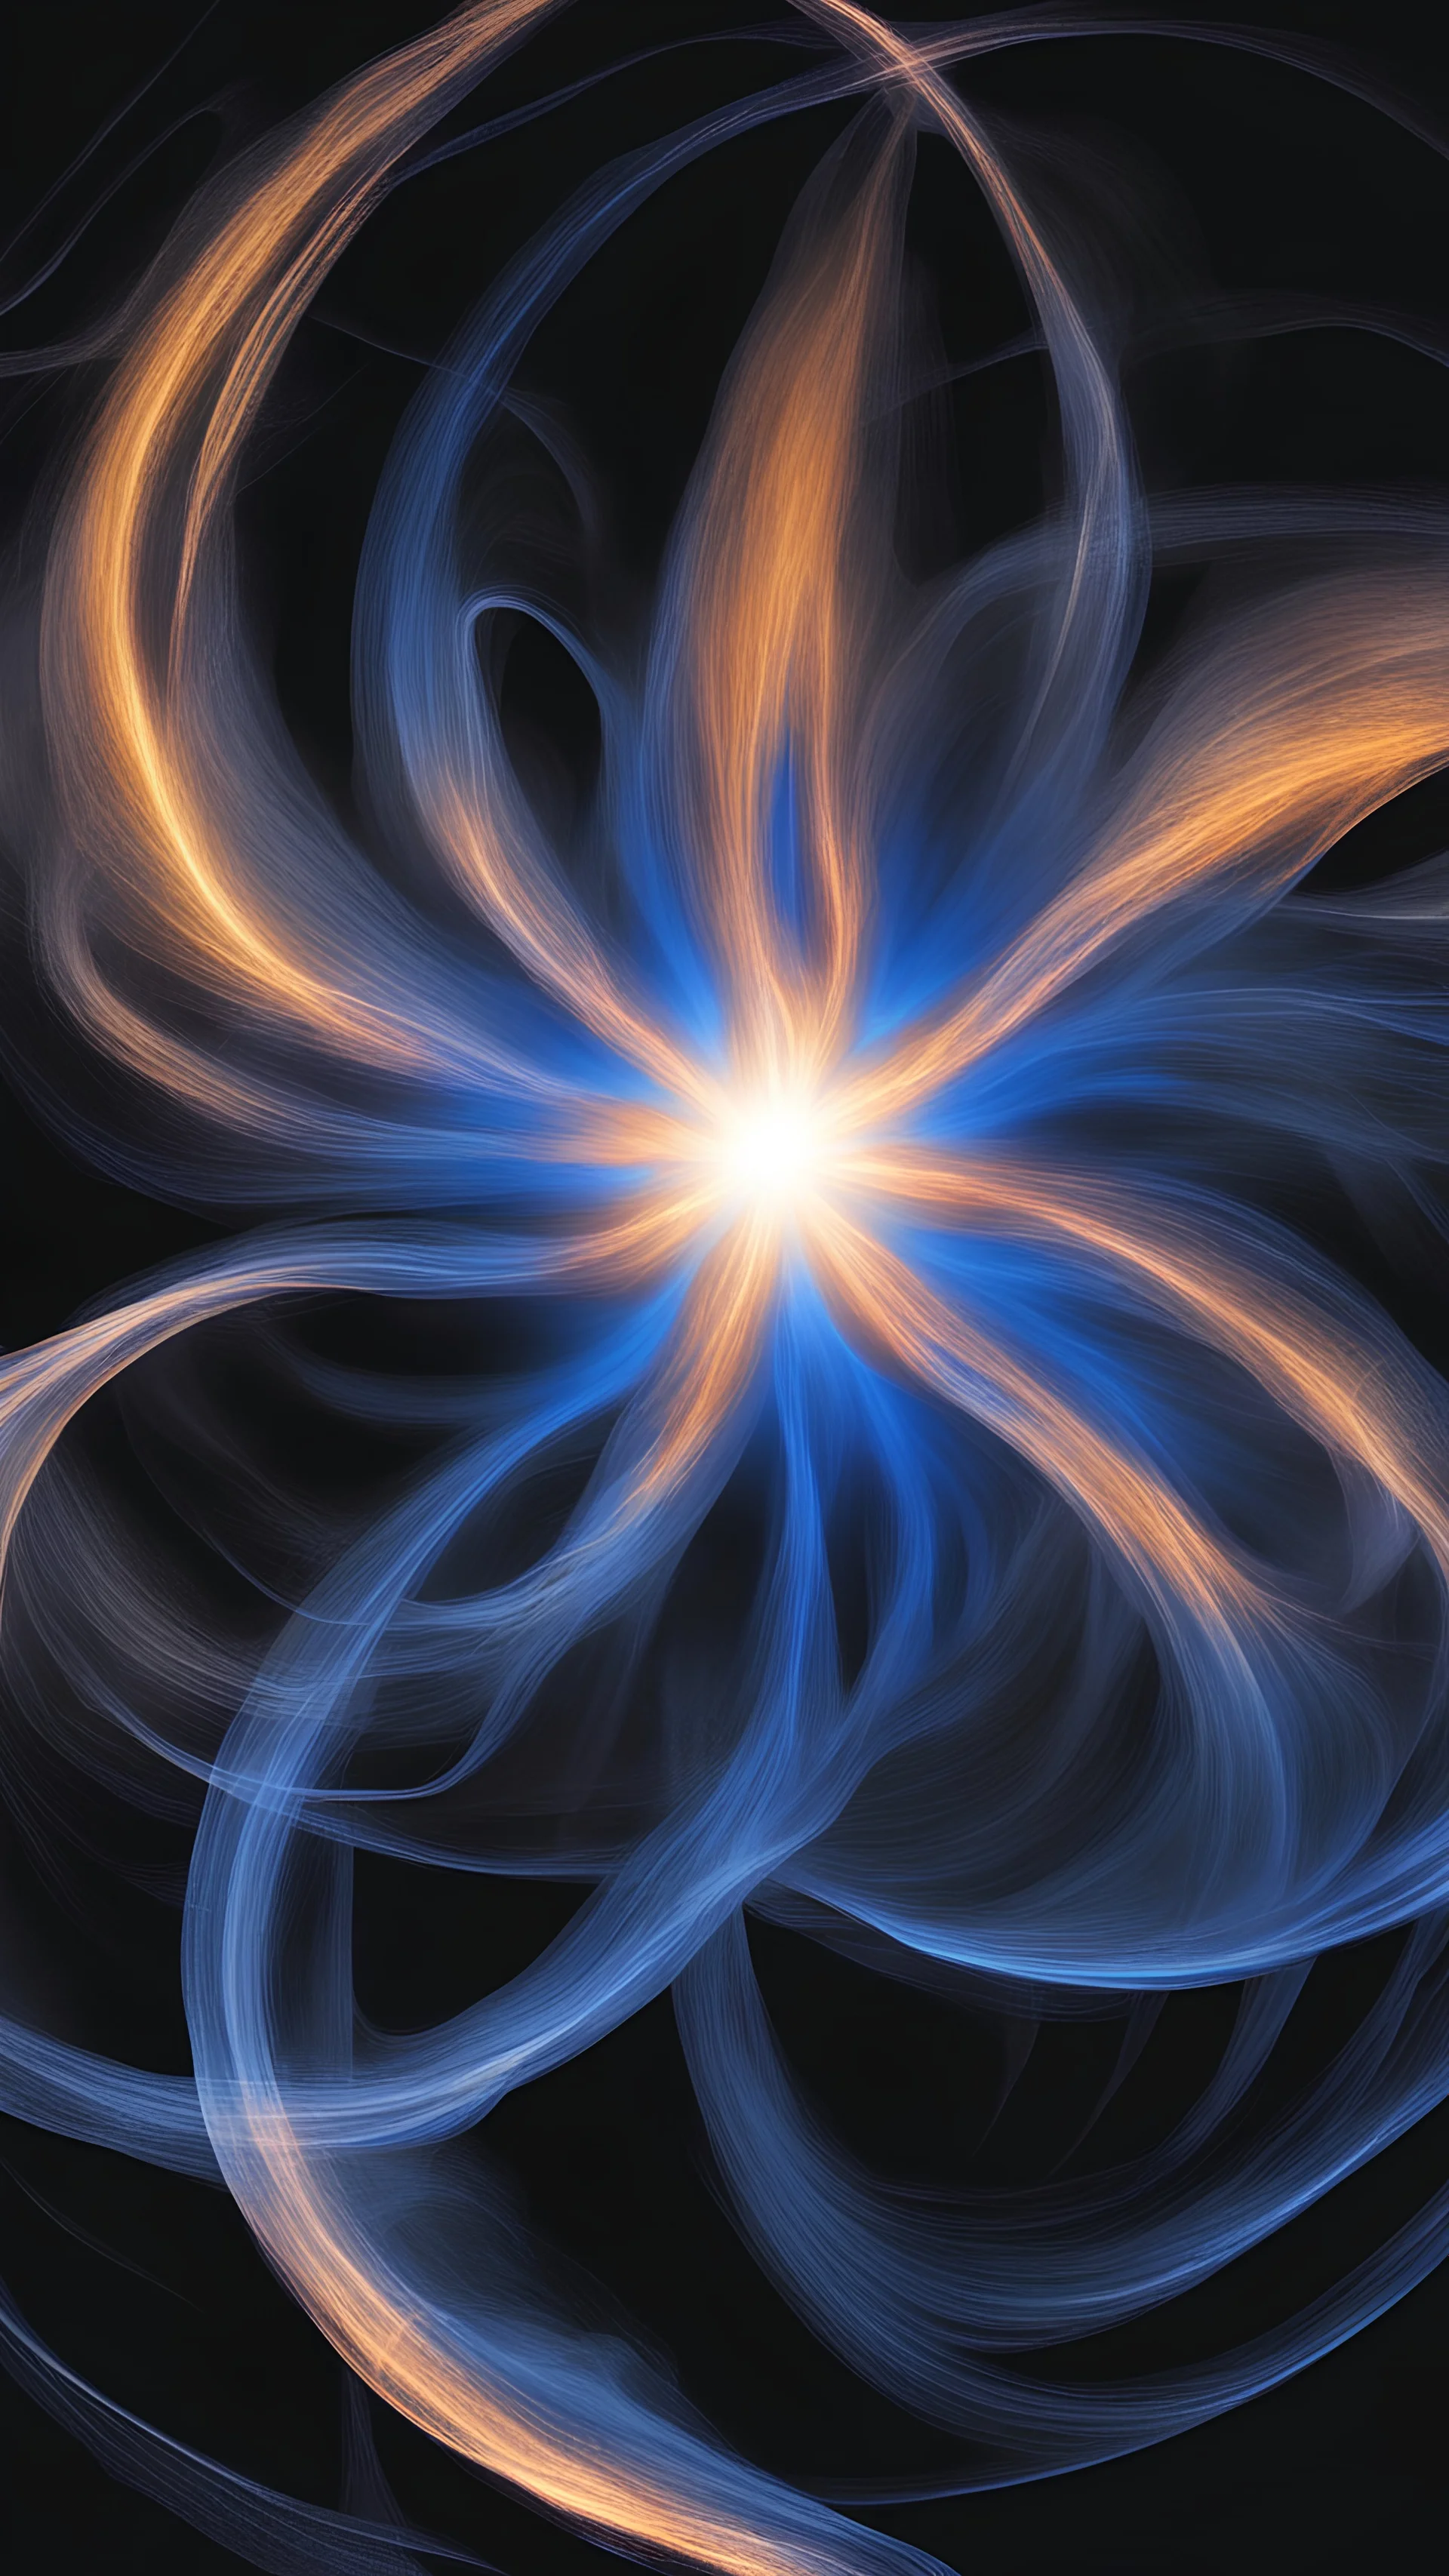 abstract picture of a blue flame going around the earth